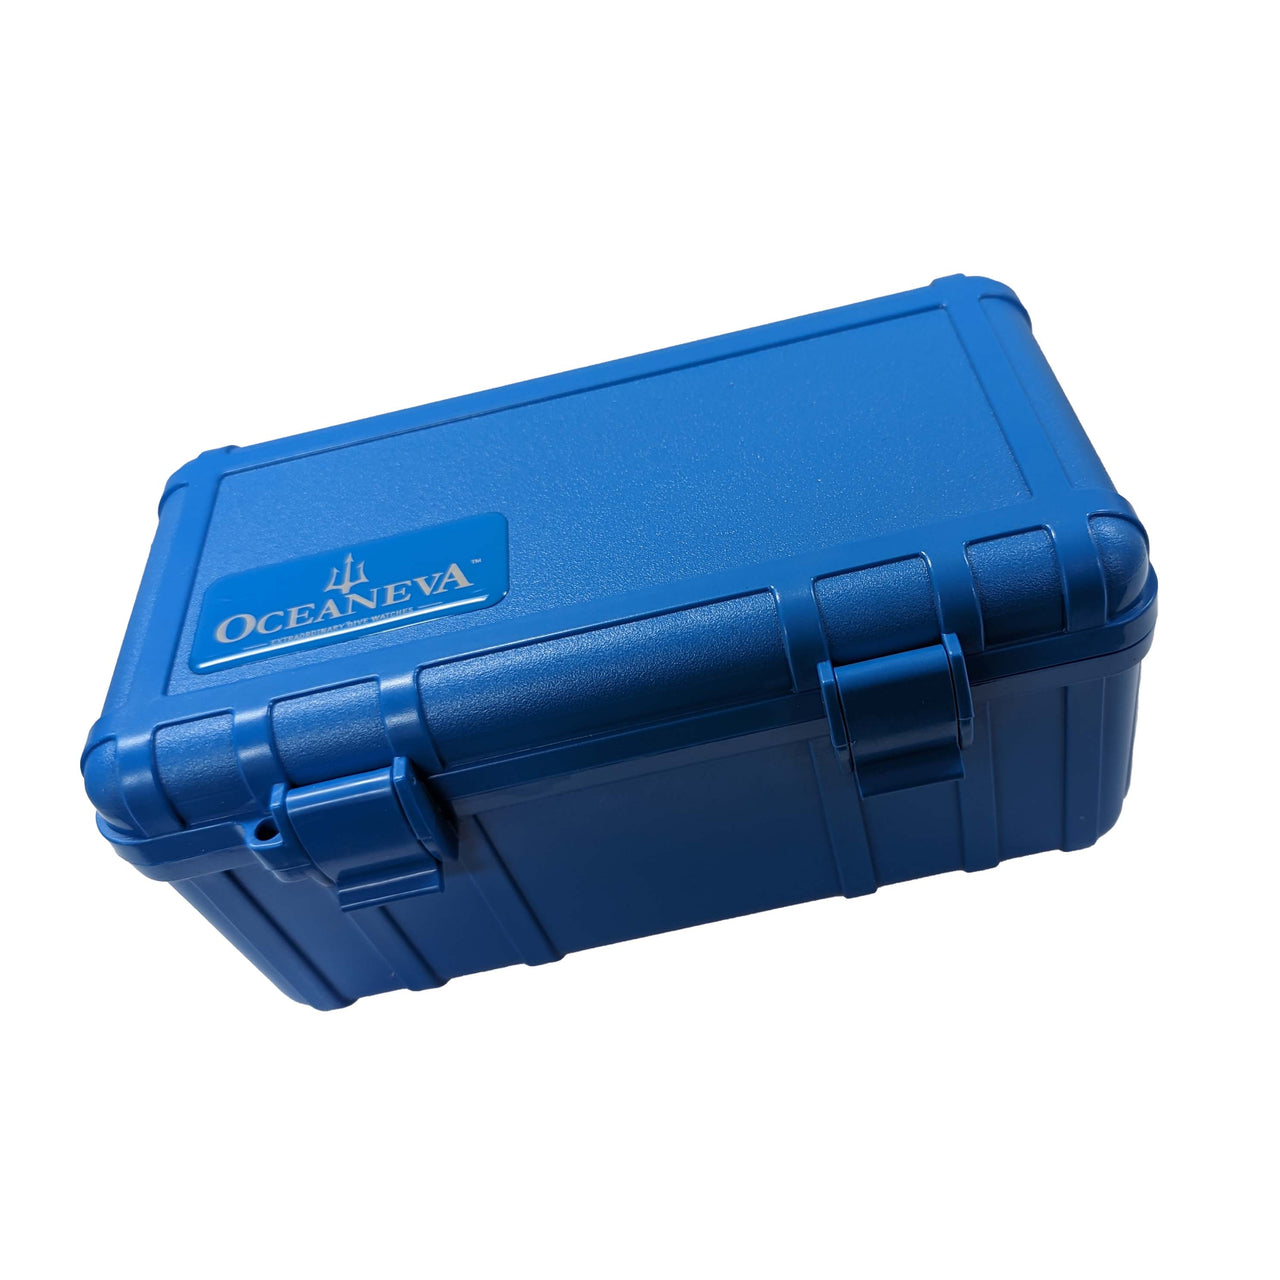 Waterproof Blue Case by S3 Cases for Oceaneva Titanium Automatic Watch